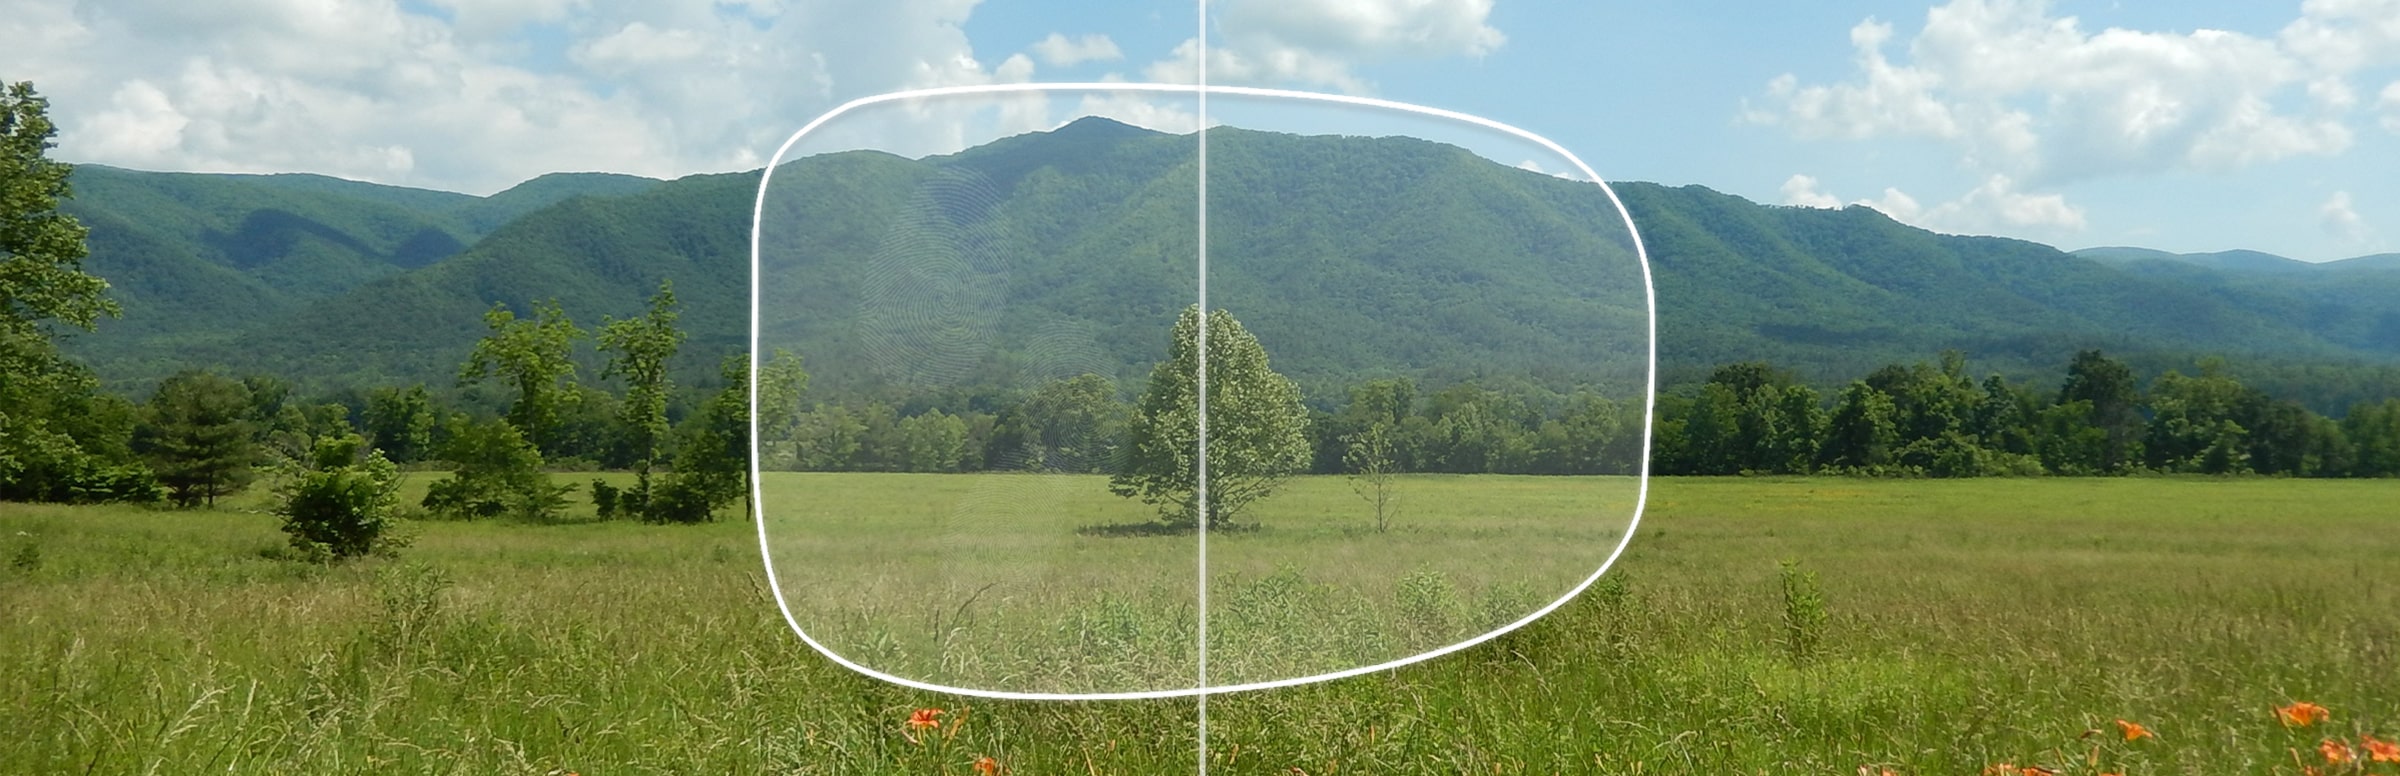 View of a field through a lens with and without an oleophobic coating